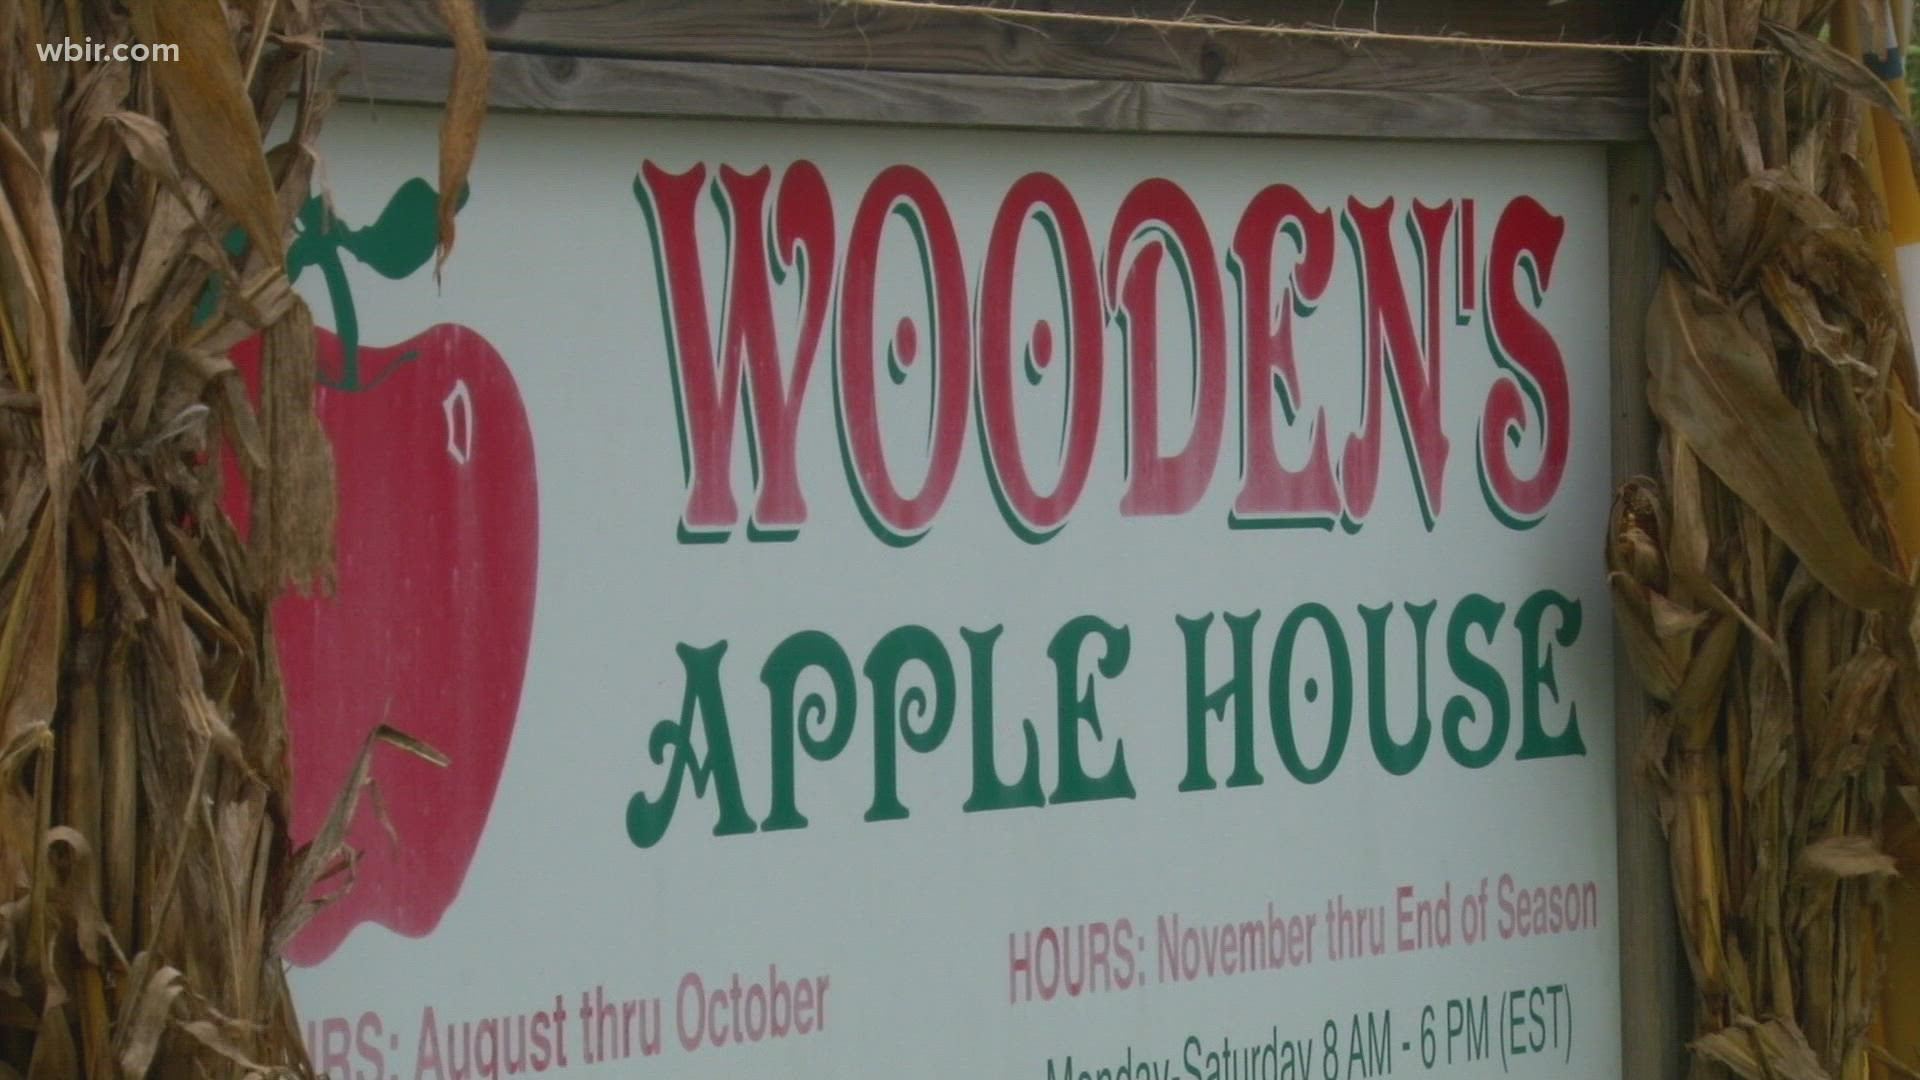 Oren Wooden's Apple House suffered a late freeze this year and they recommend to get your apple picking trips early.